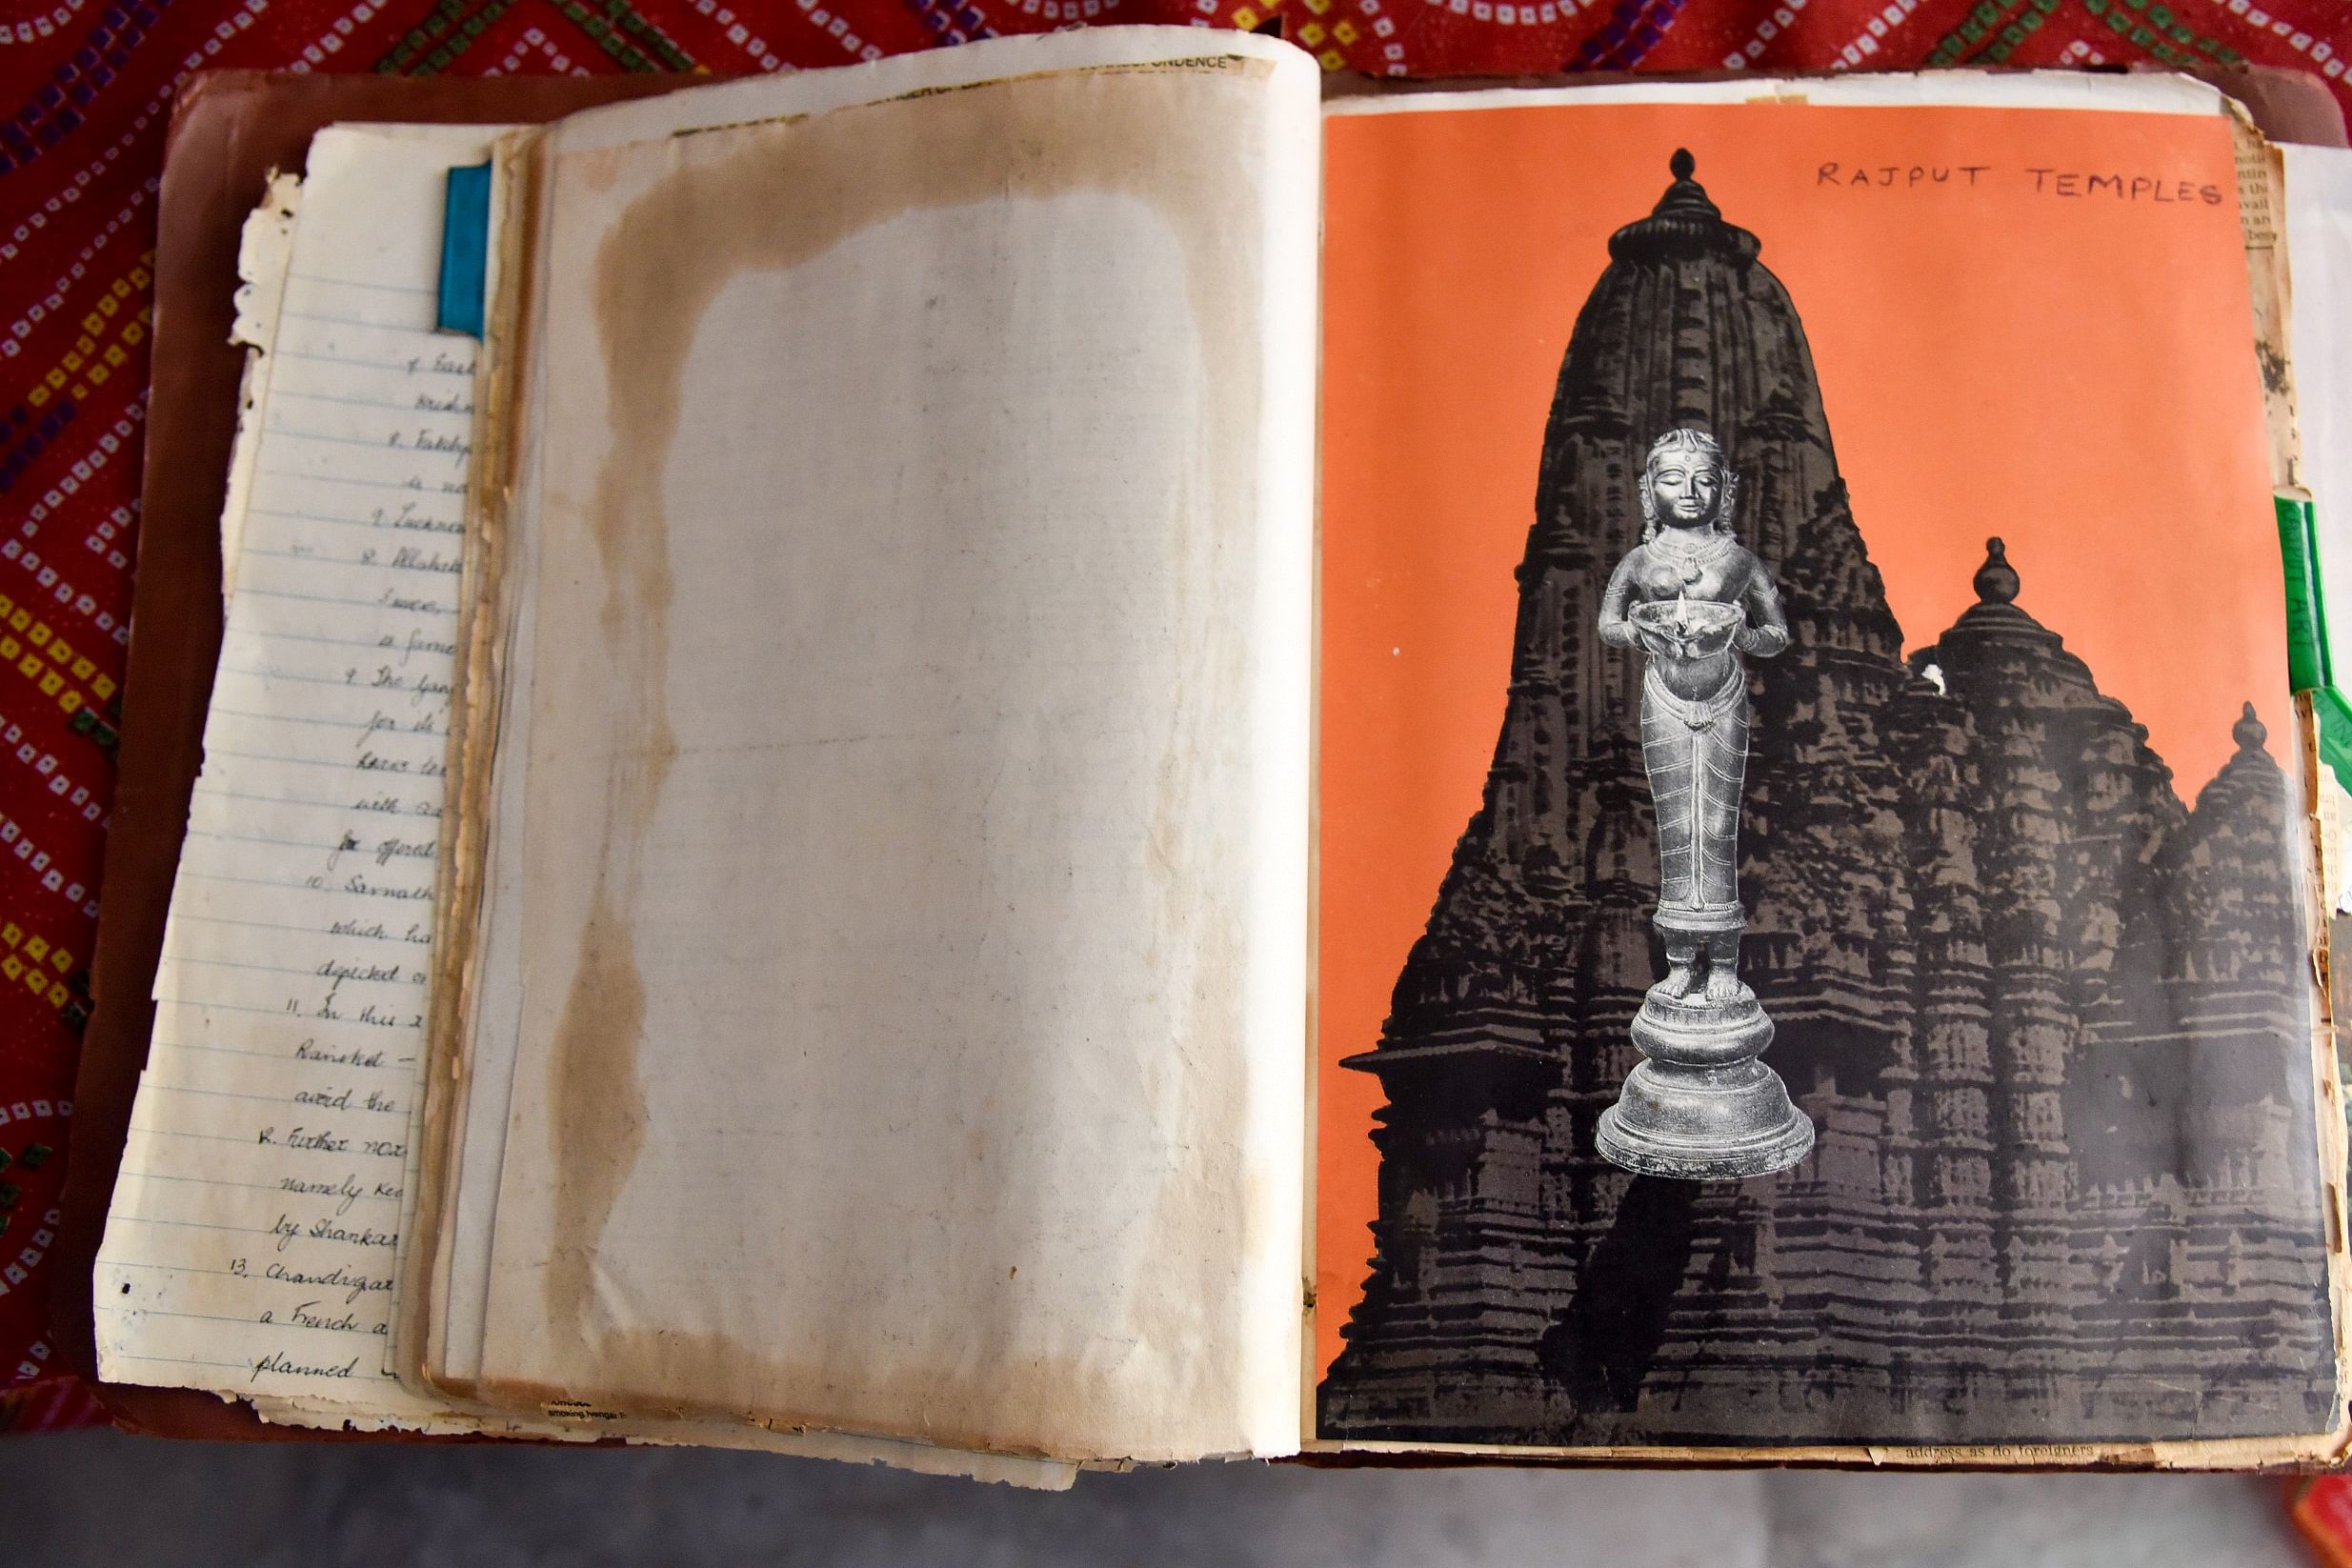 Heera’s other hobby is collecting pictures of temples across India and other countries.